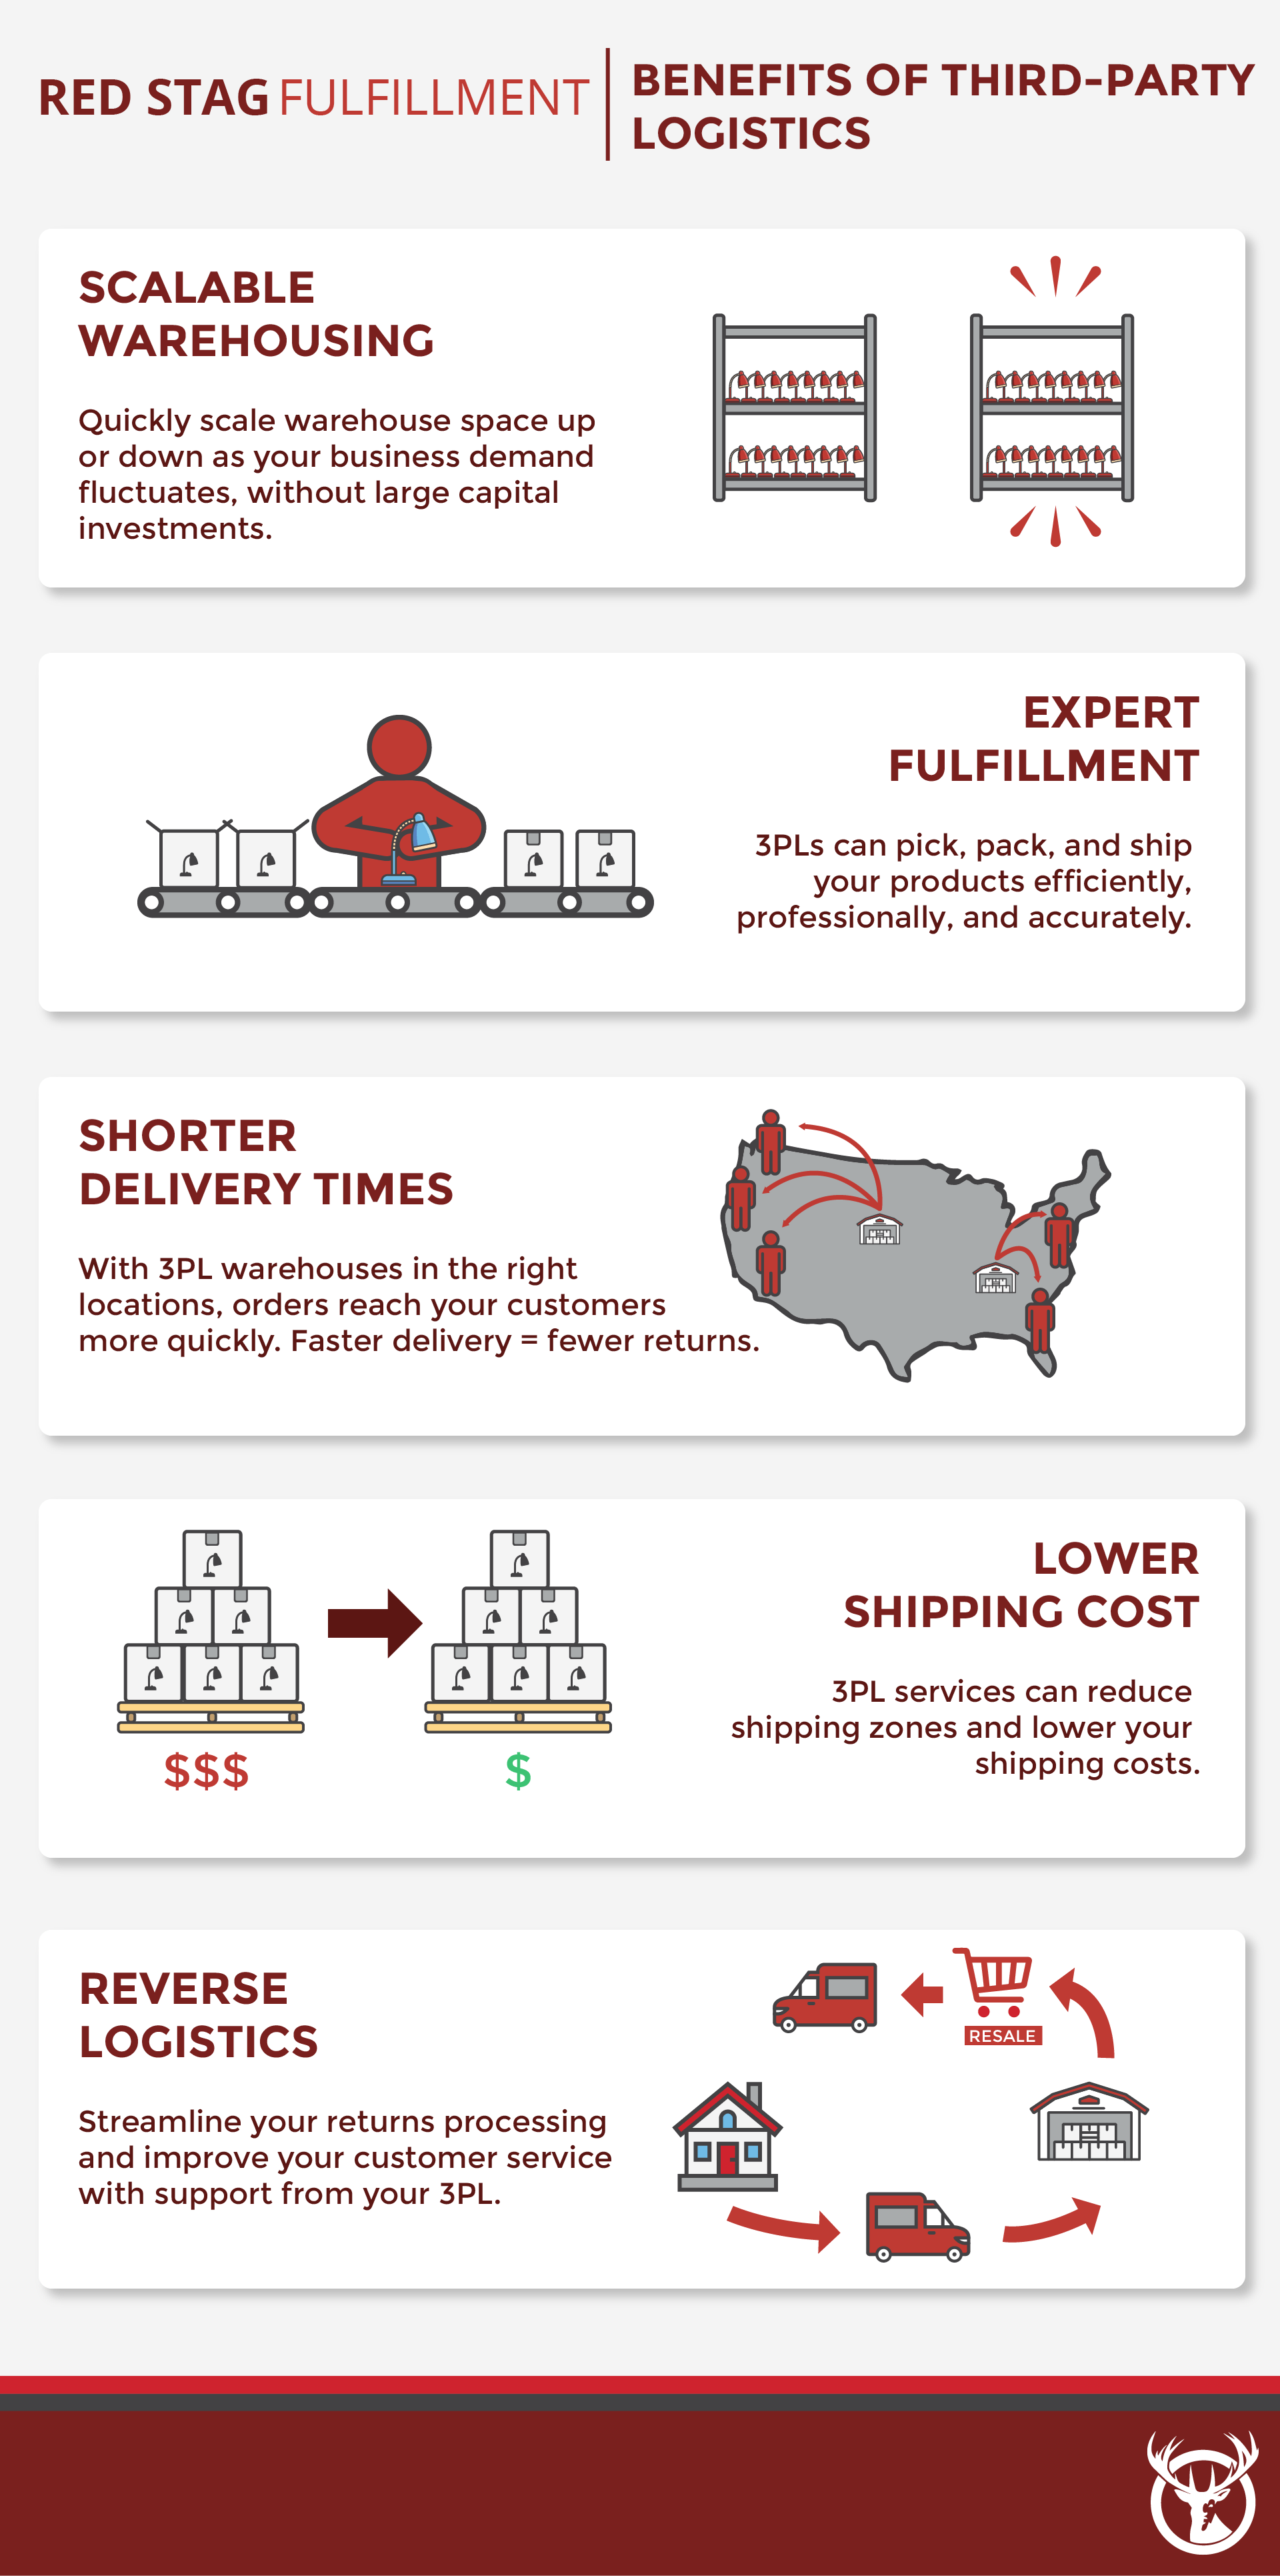 Benefits of 3rd-party logistics